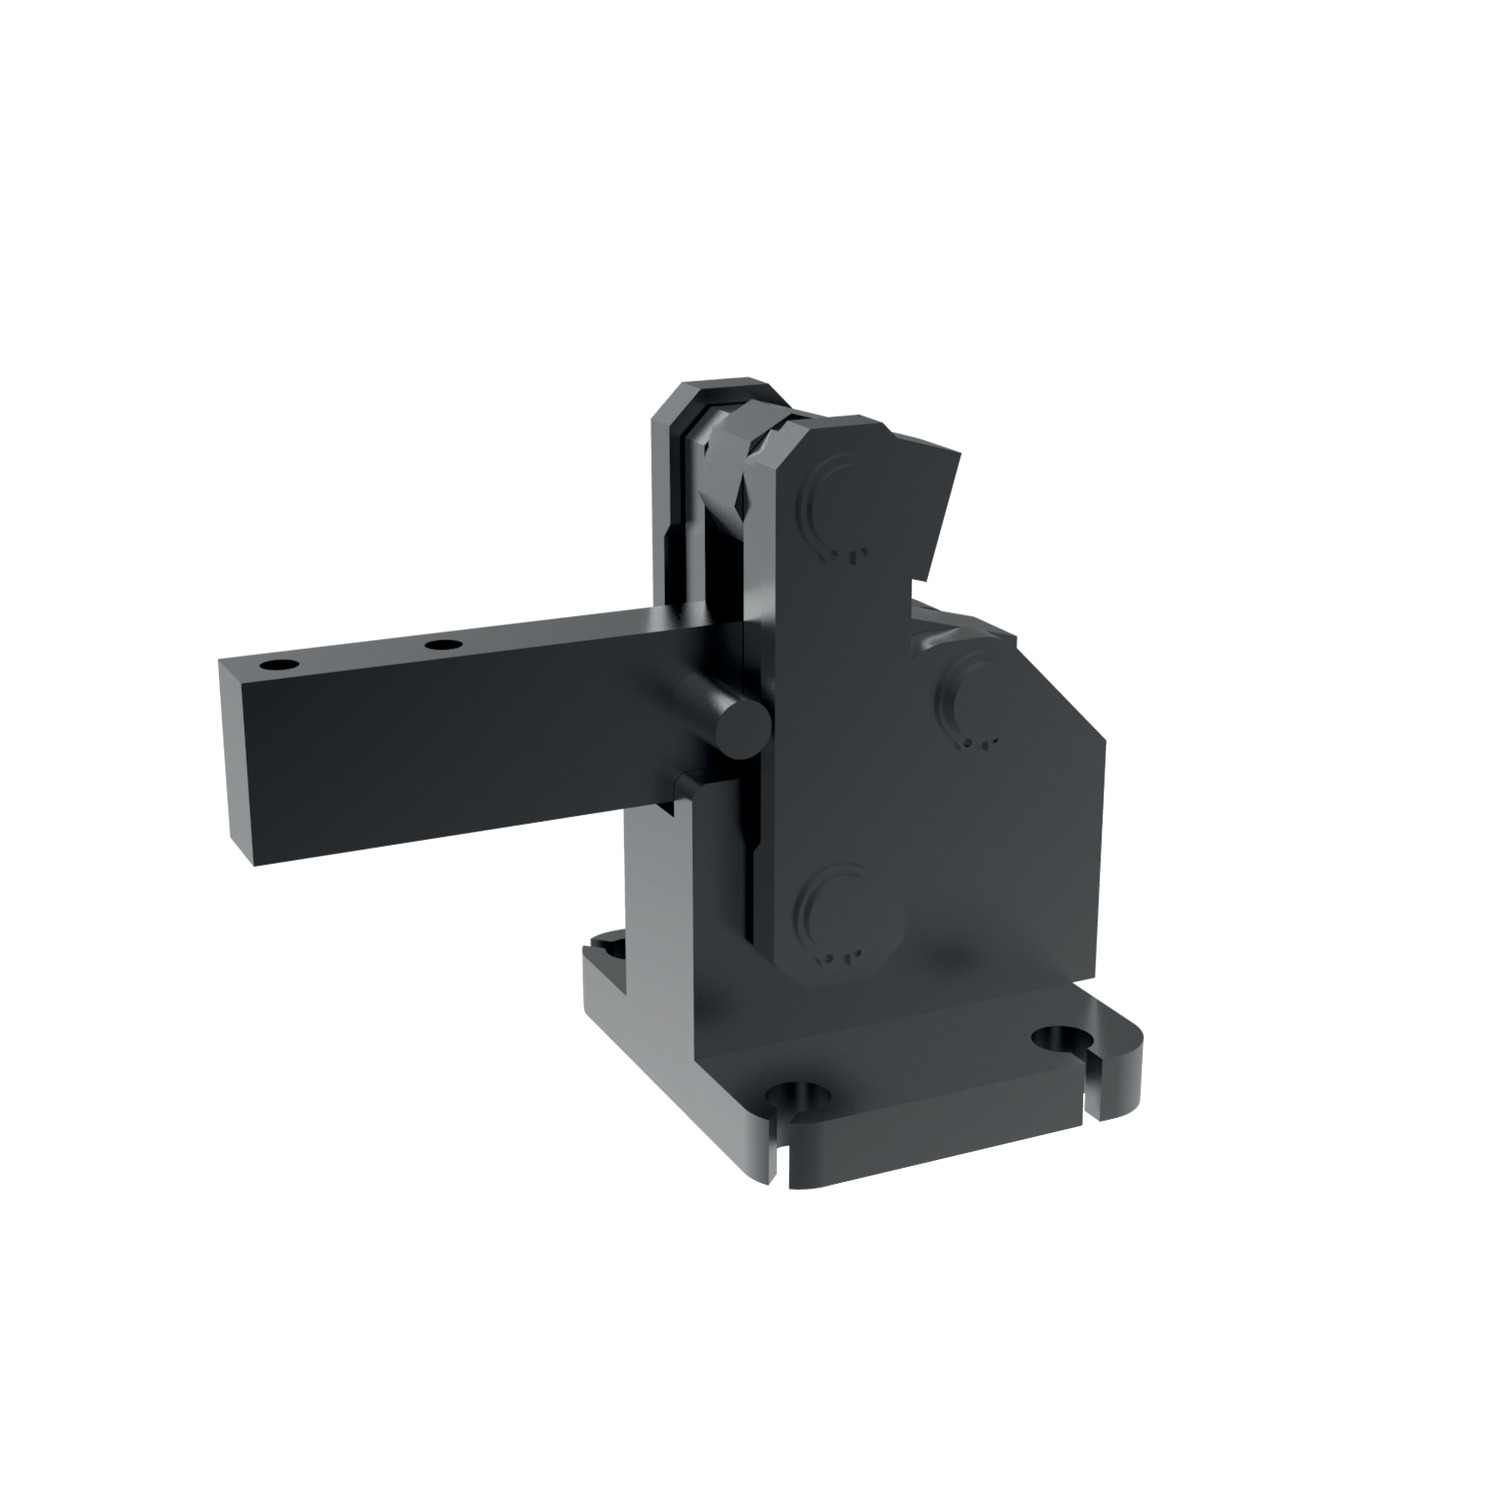 46100 Heavy Duty Vertical Toggle Clamp